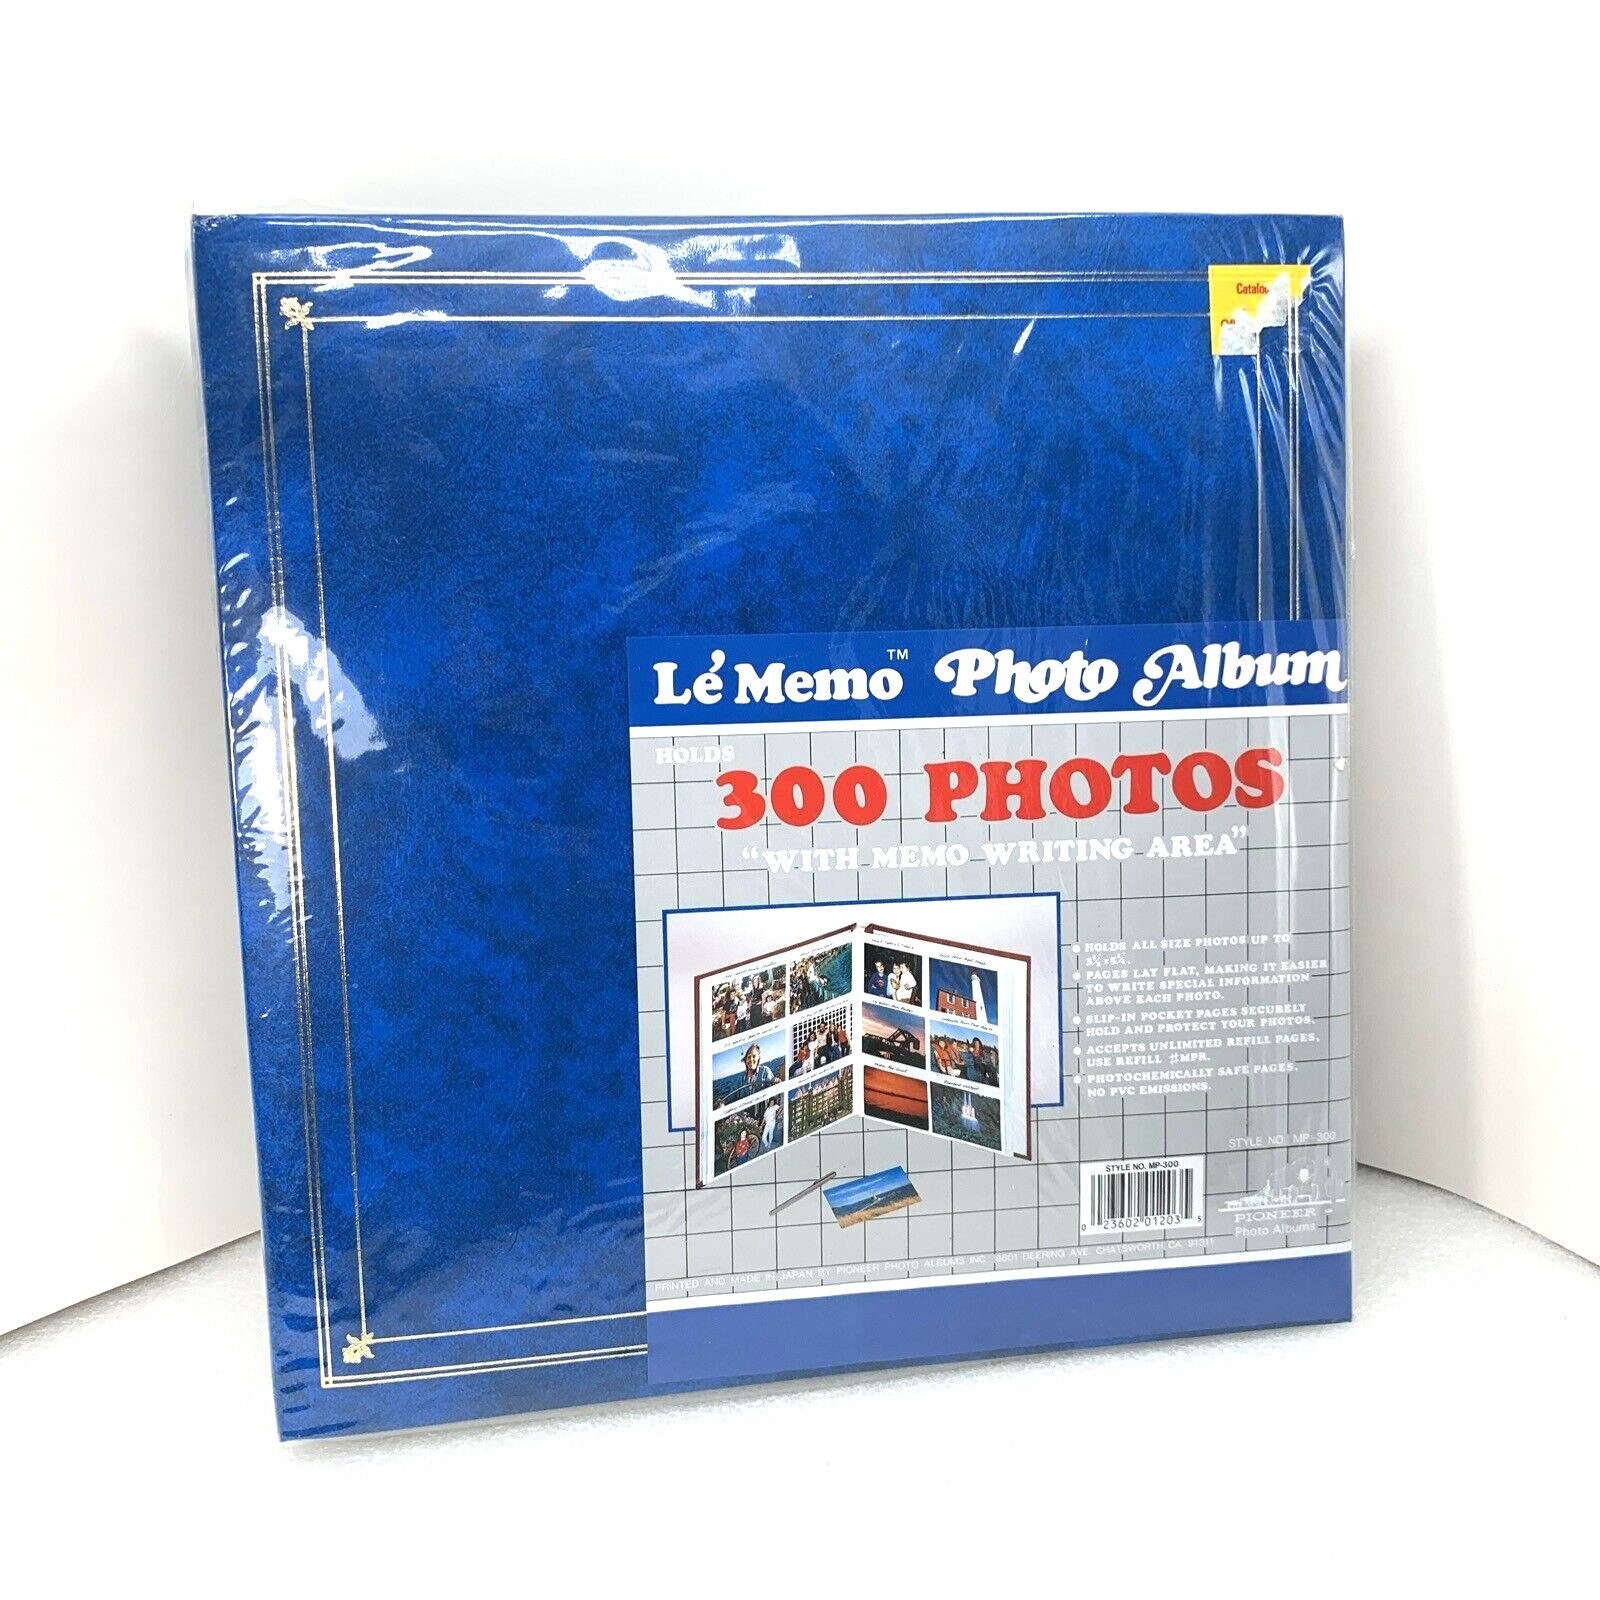 LARGE GUARDIAN POSTCARD ALBUM / BINDER WITH OPTIONS FOR SLEEVES & SLIPCASE